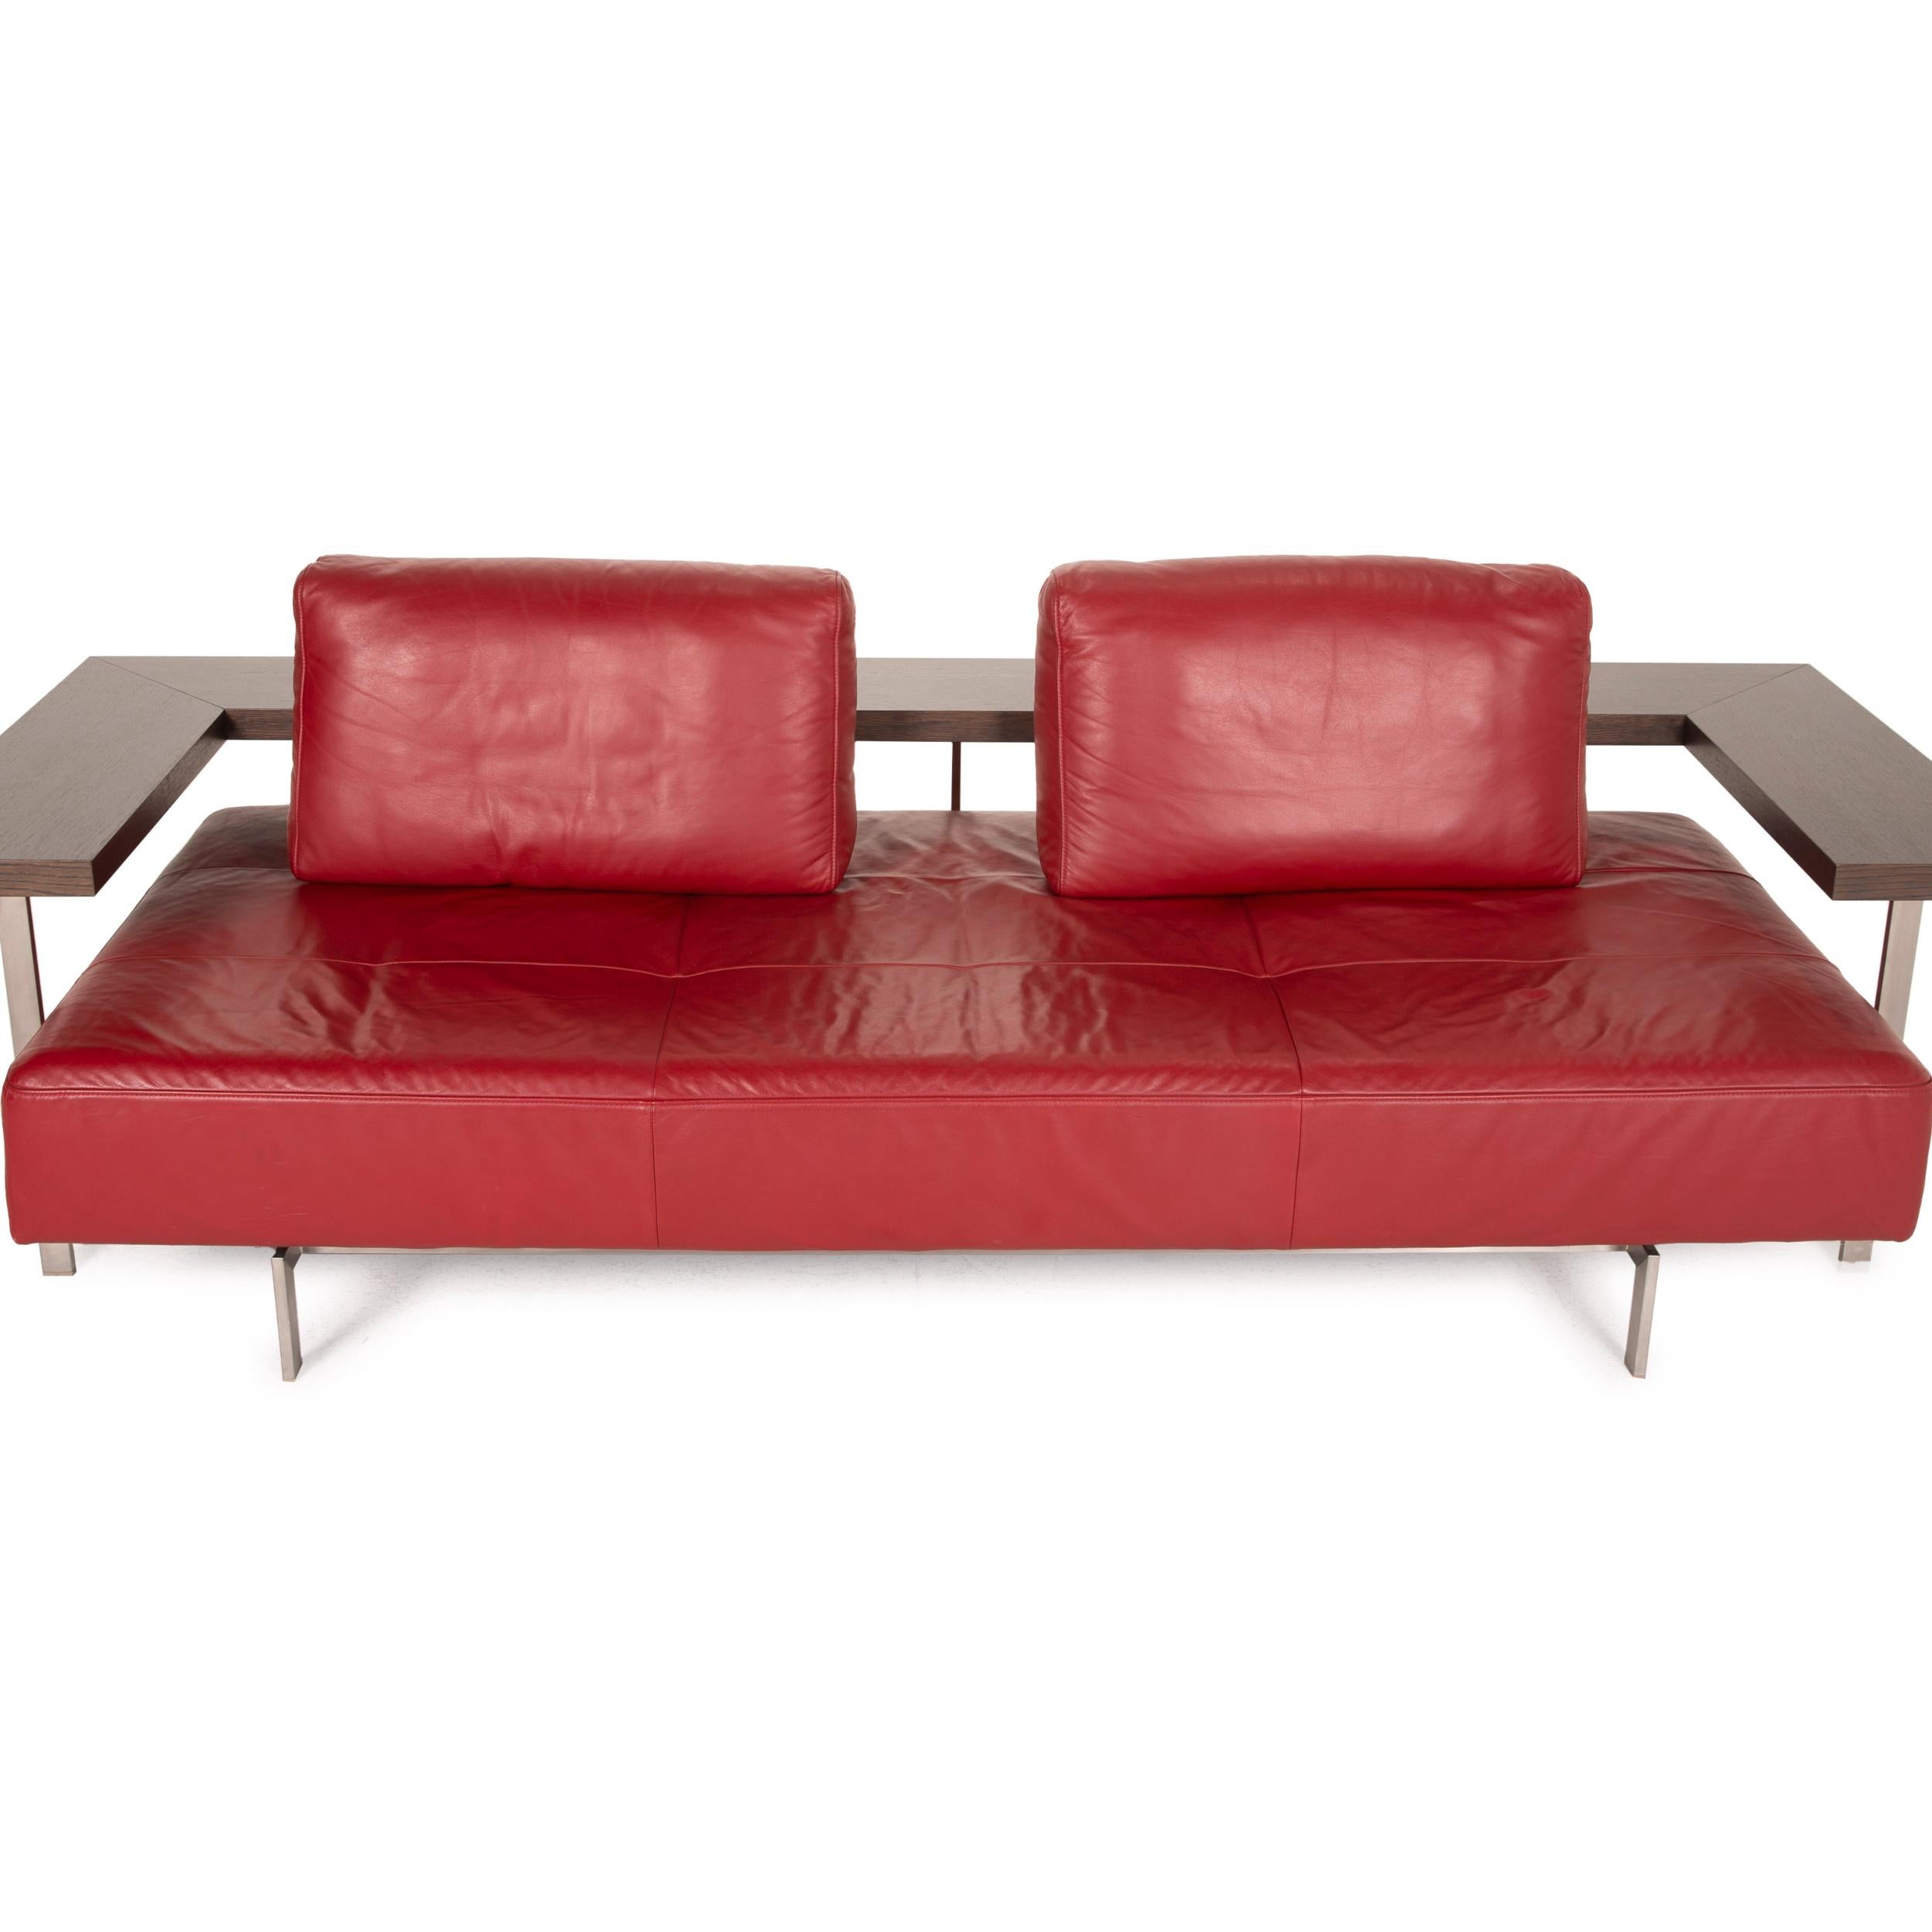 Rolf Benz Dono leather sofa red two-seater couch 2